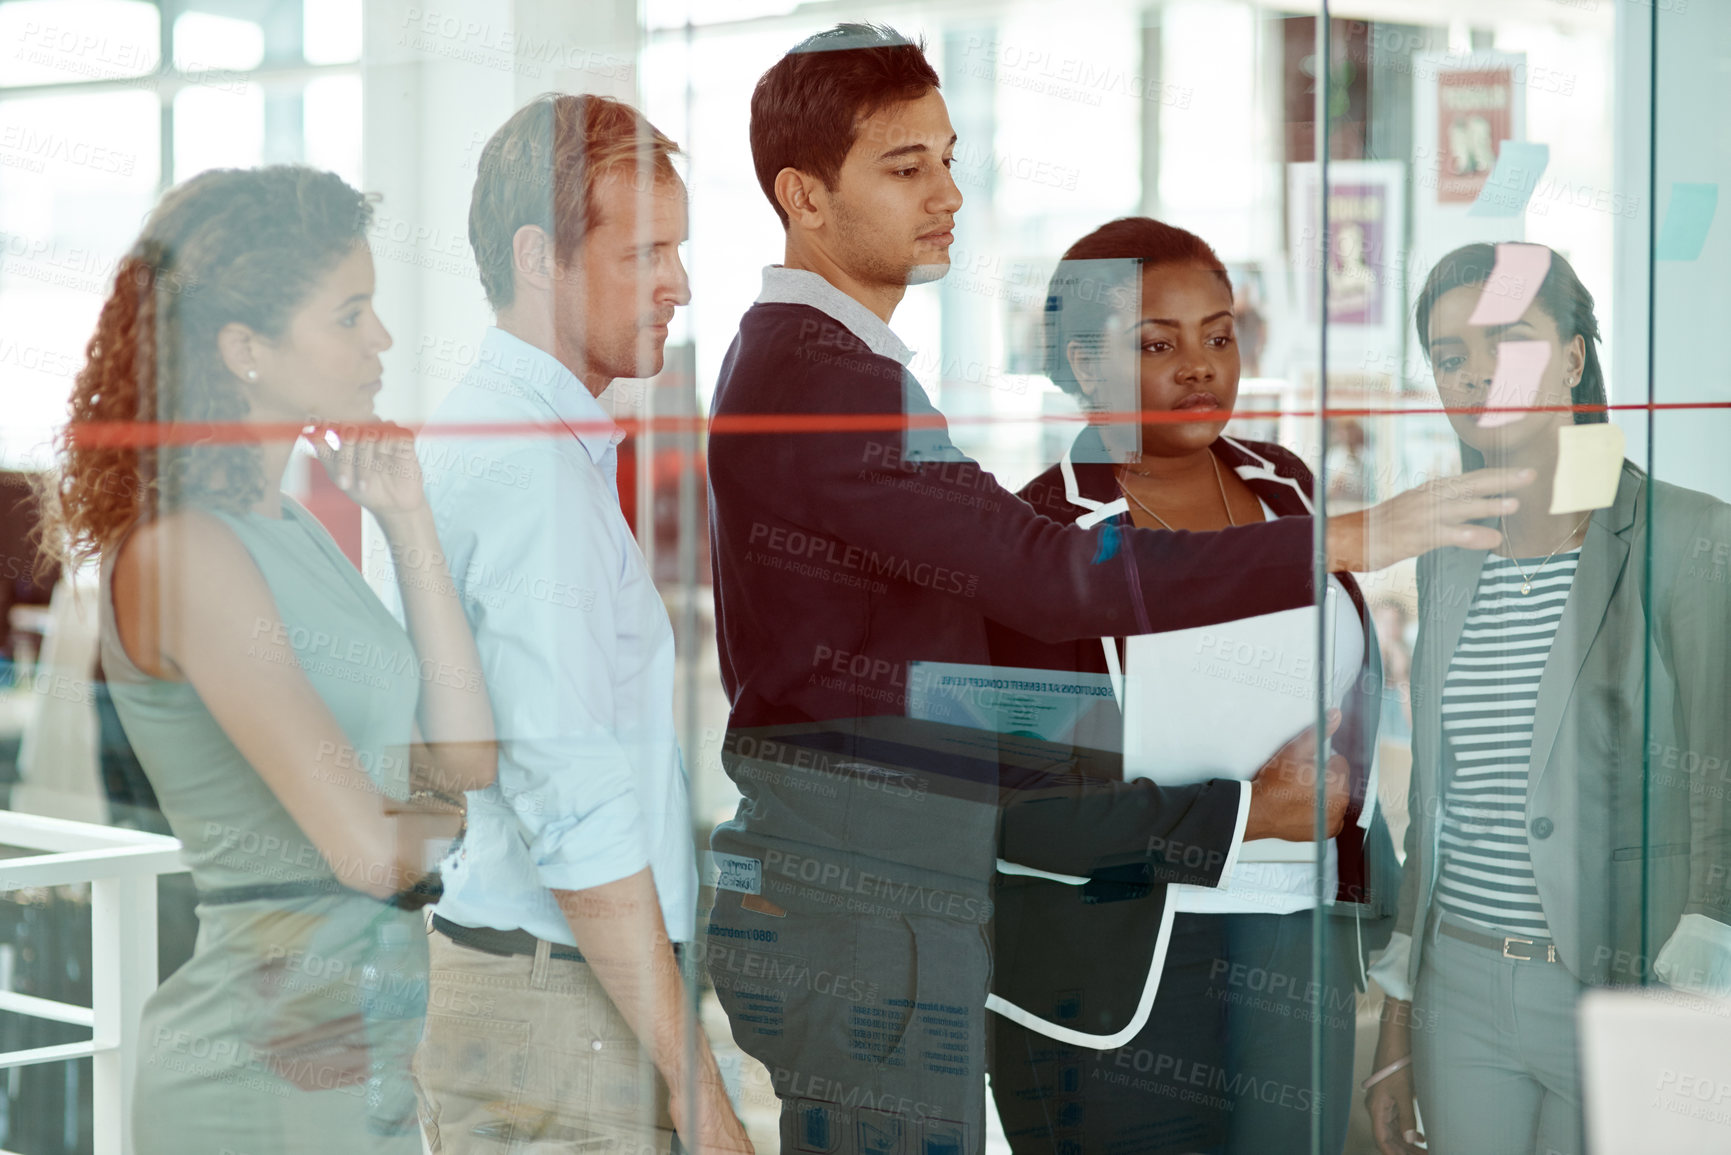 Buy stock photo Cropped shot of a group of businesspeople strategizing on a glass wipe board in their office